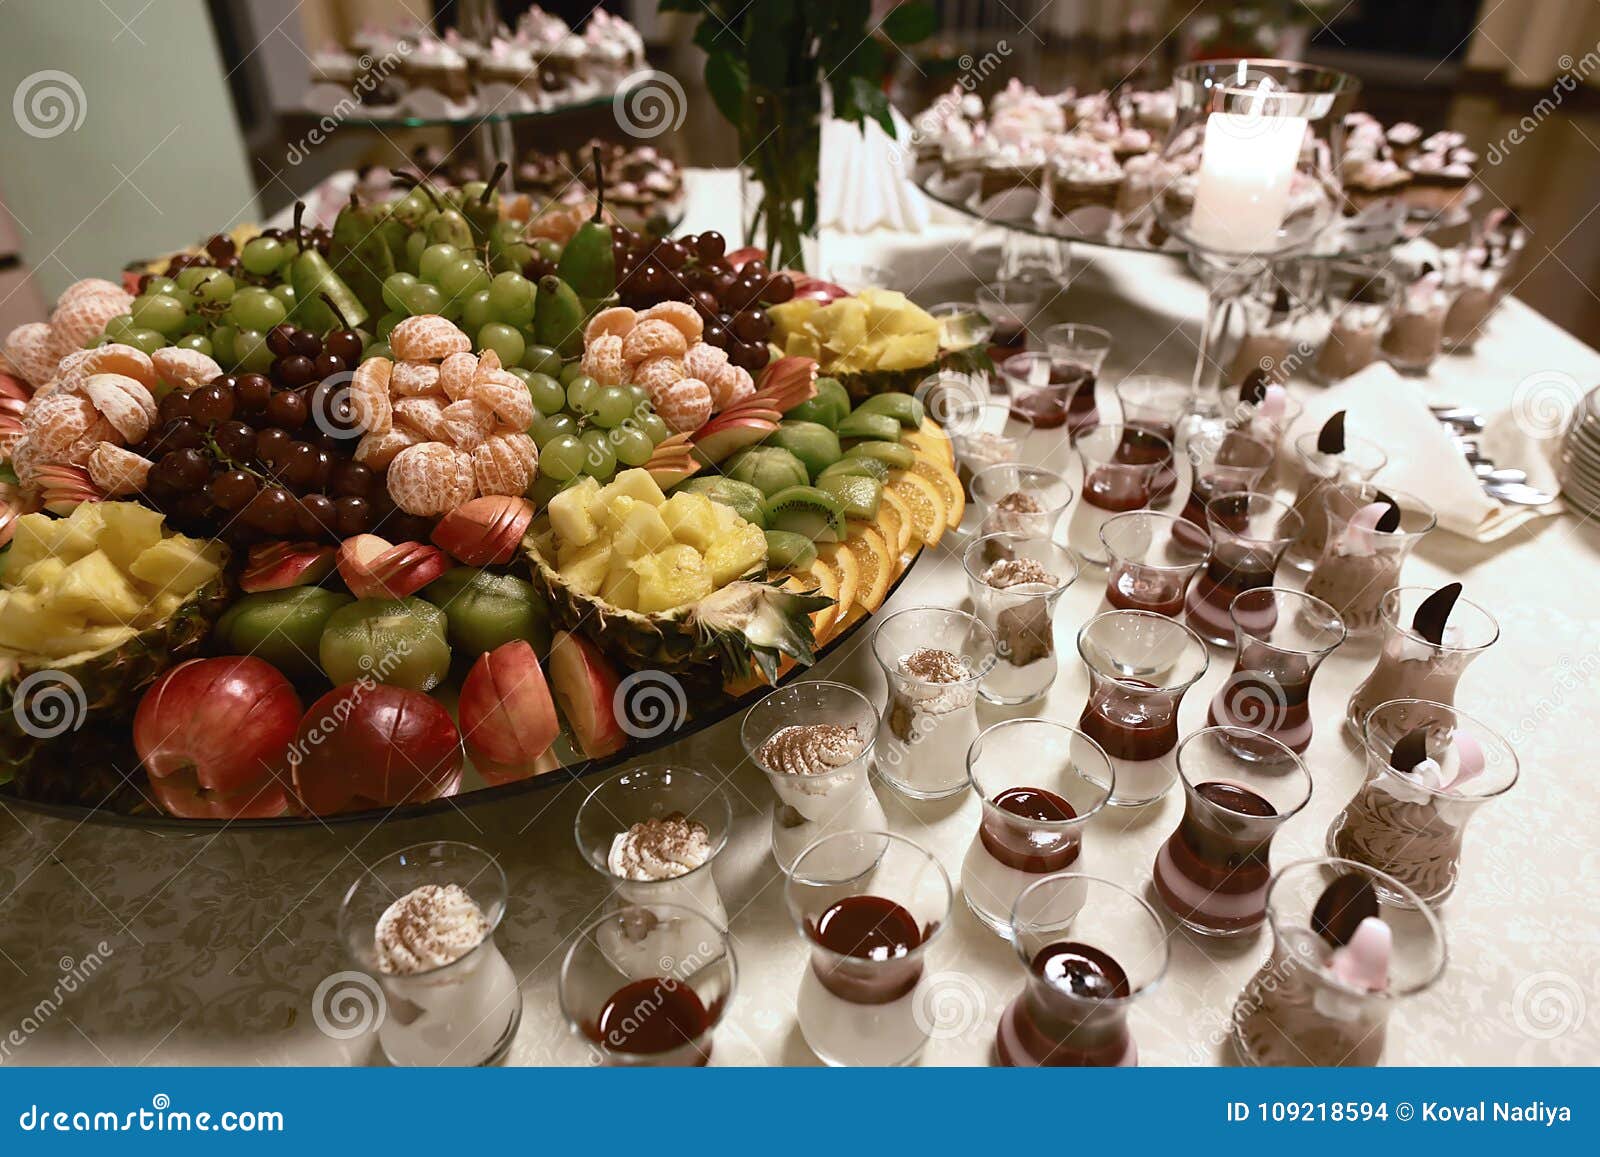 Wedding Various Fresh Fruits With Tasty Colour And Desserts In